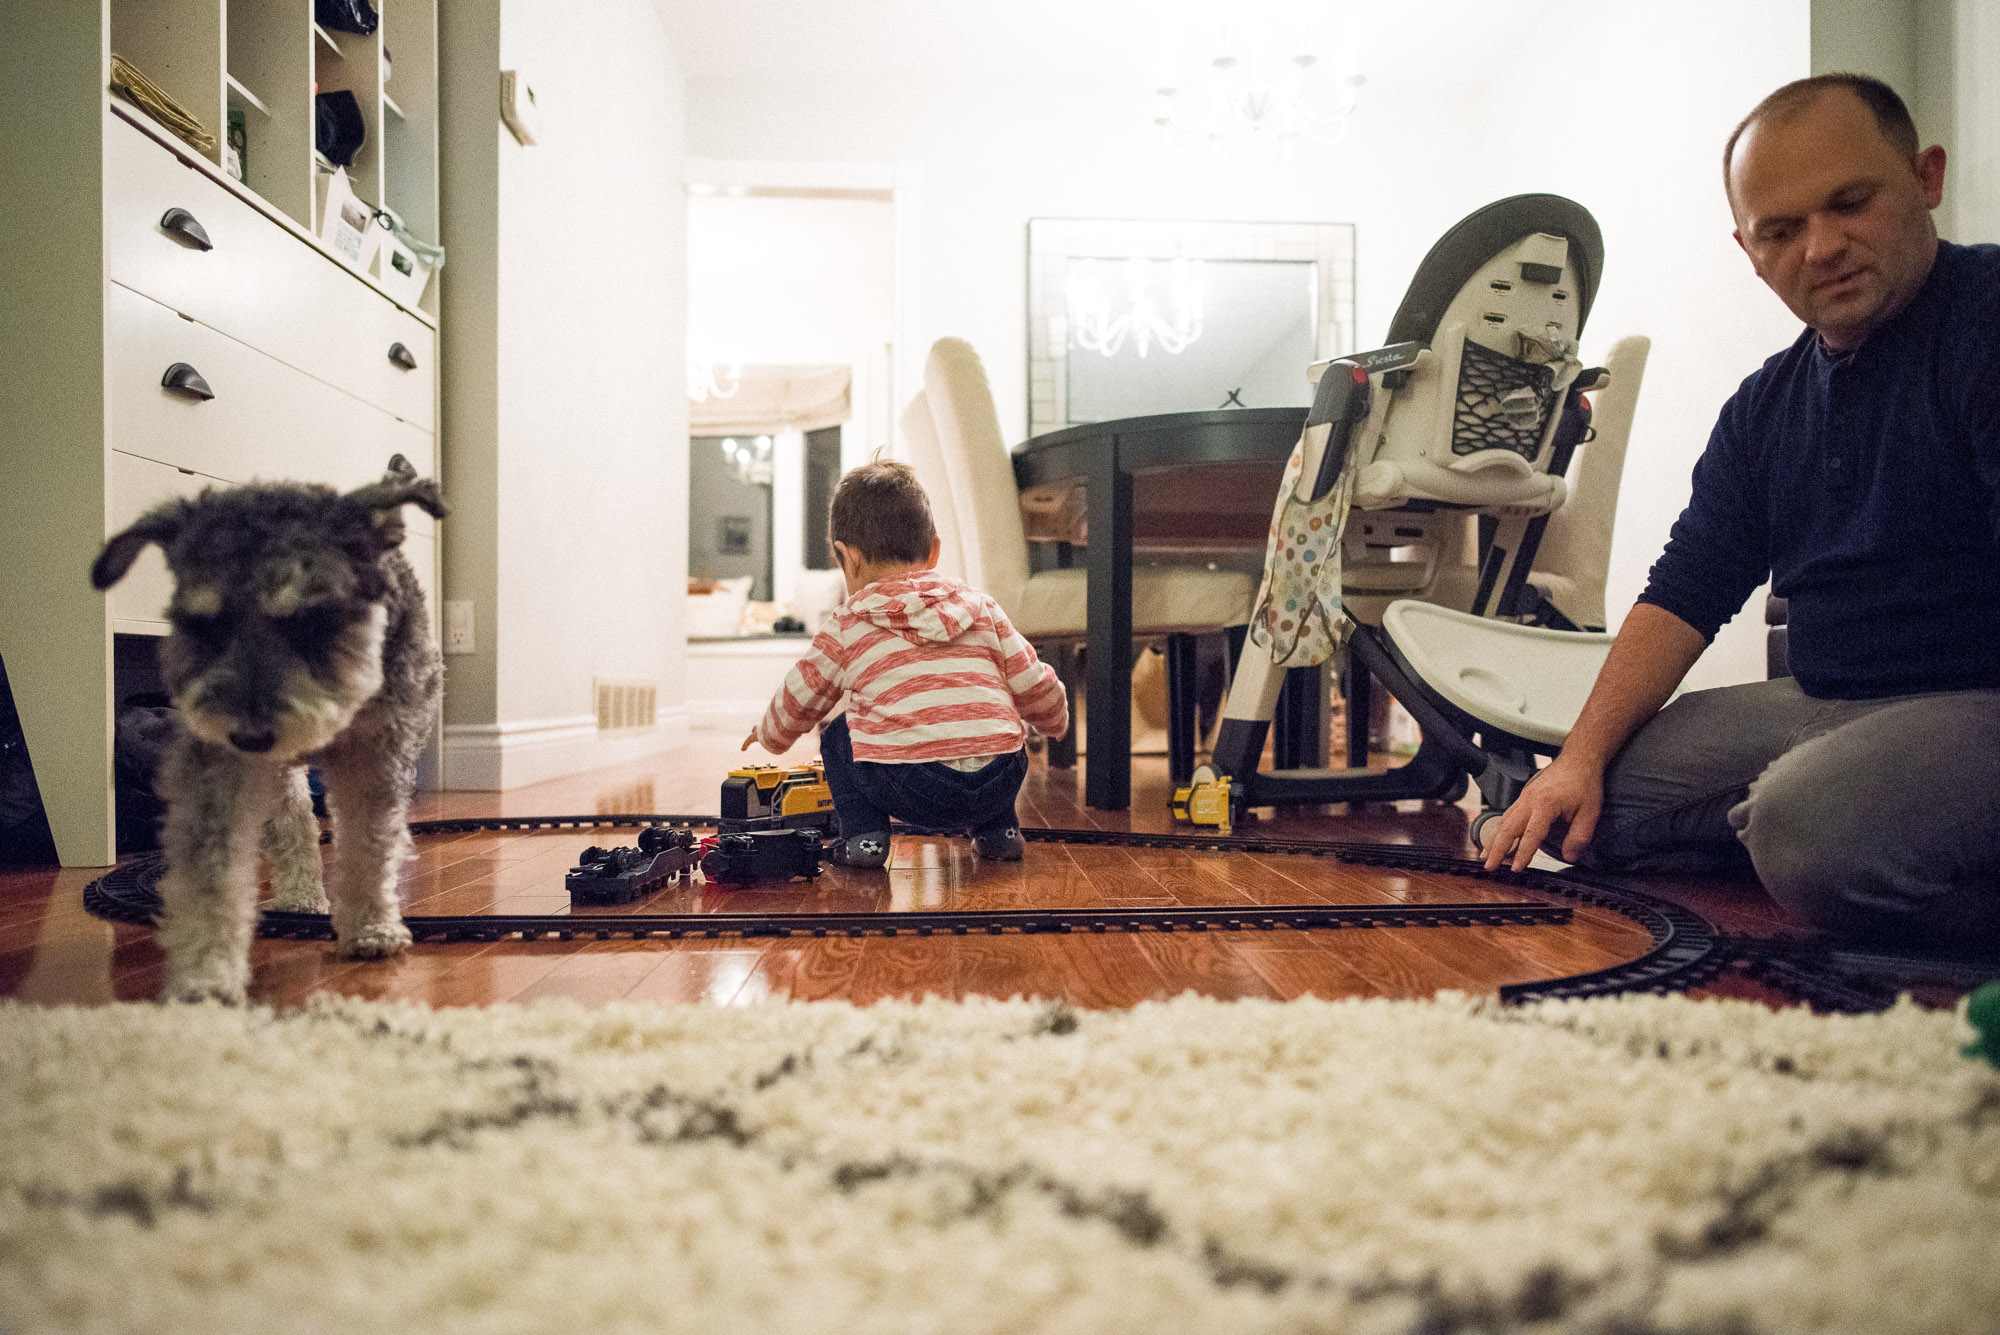 dad toddler and dog in the room with the toy train set